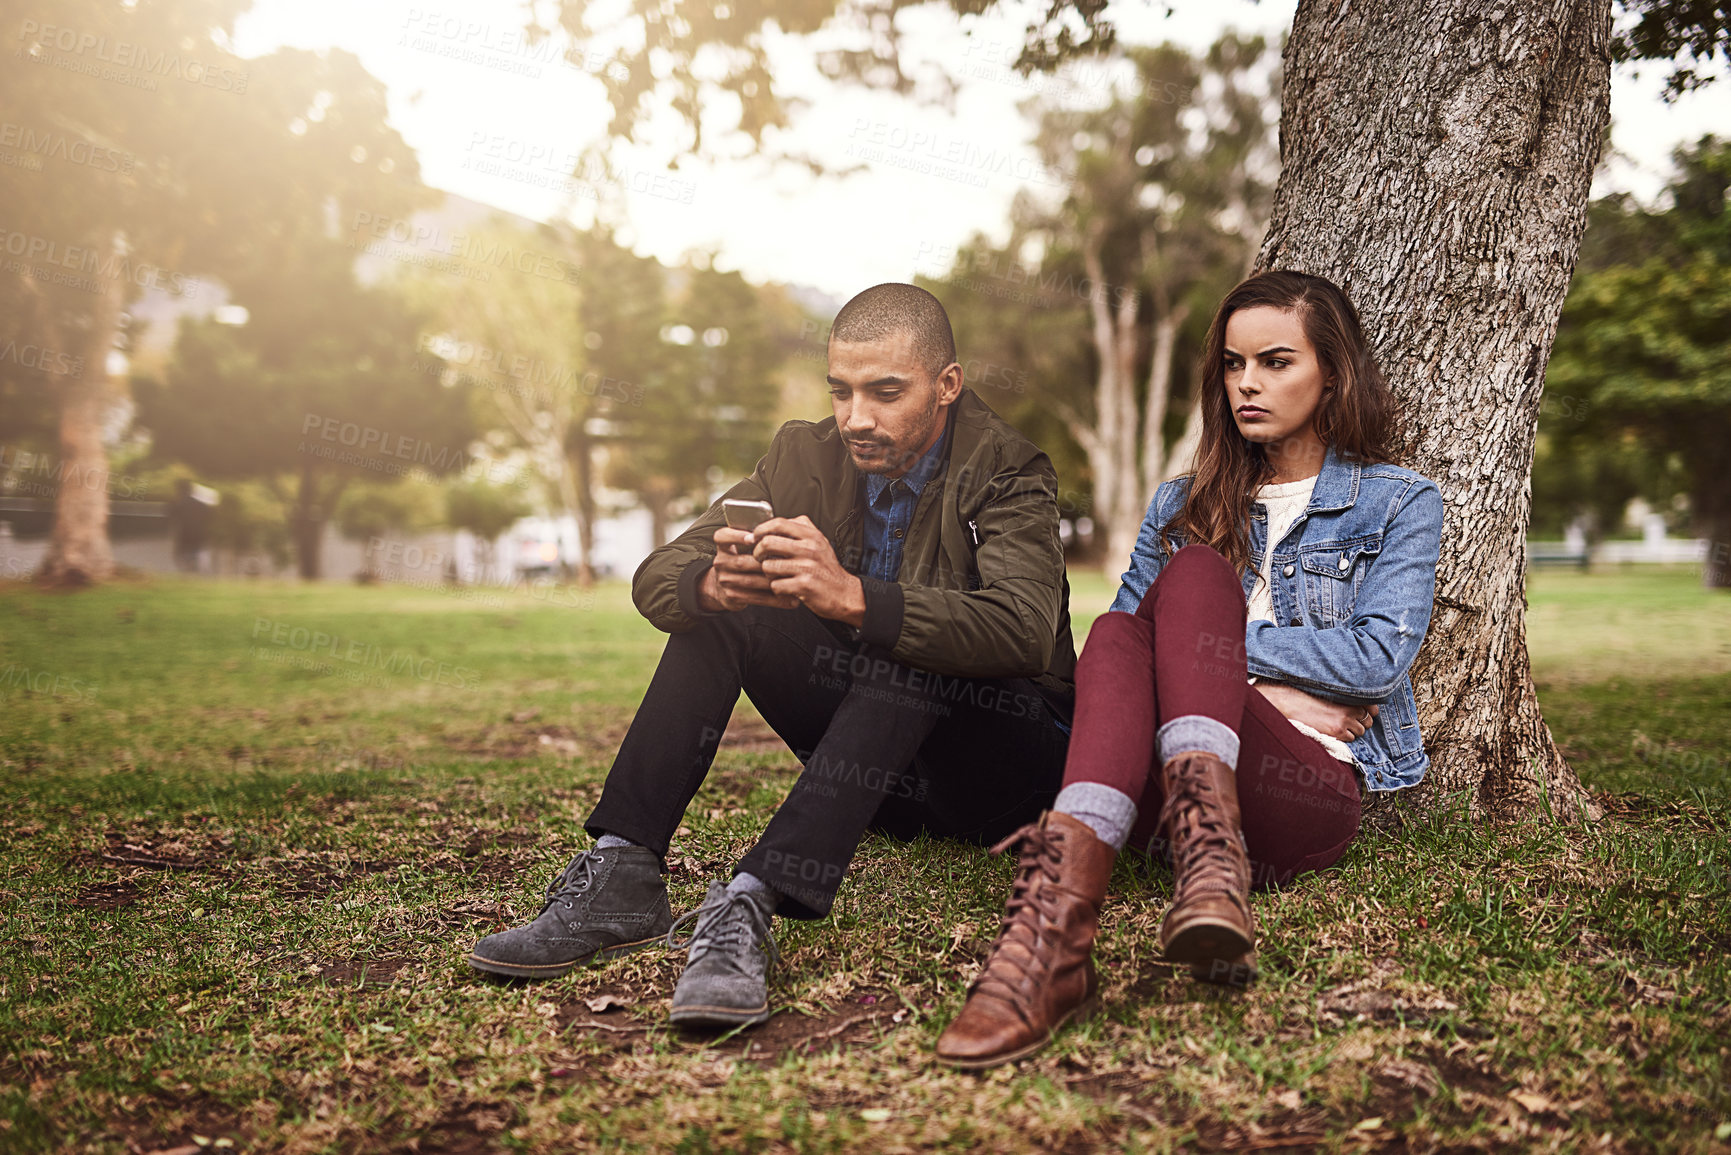 Buy stock photo Shot of a cheerful young man sitting down under a tree with his unhappy girlfriend while using his phone outside in a park